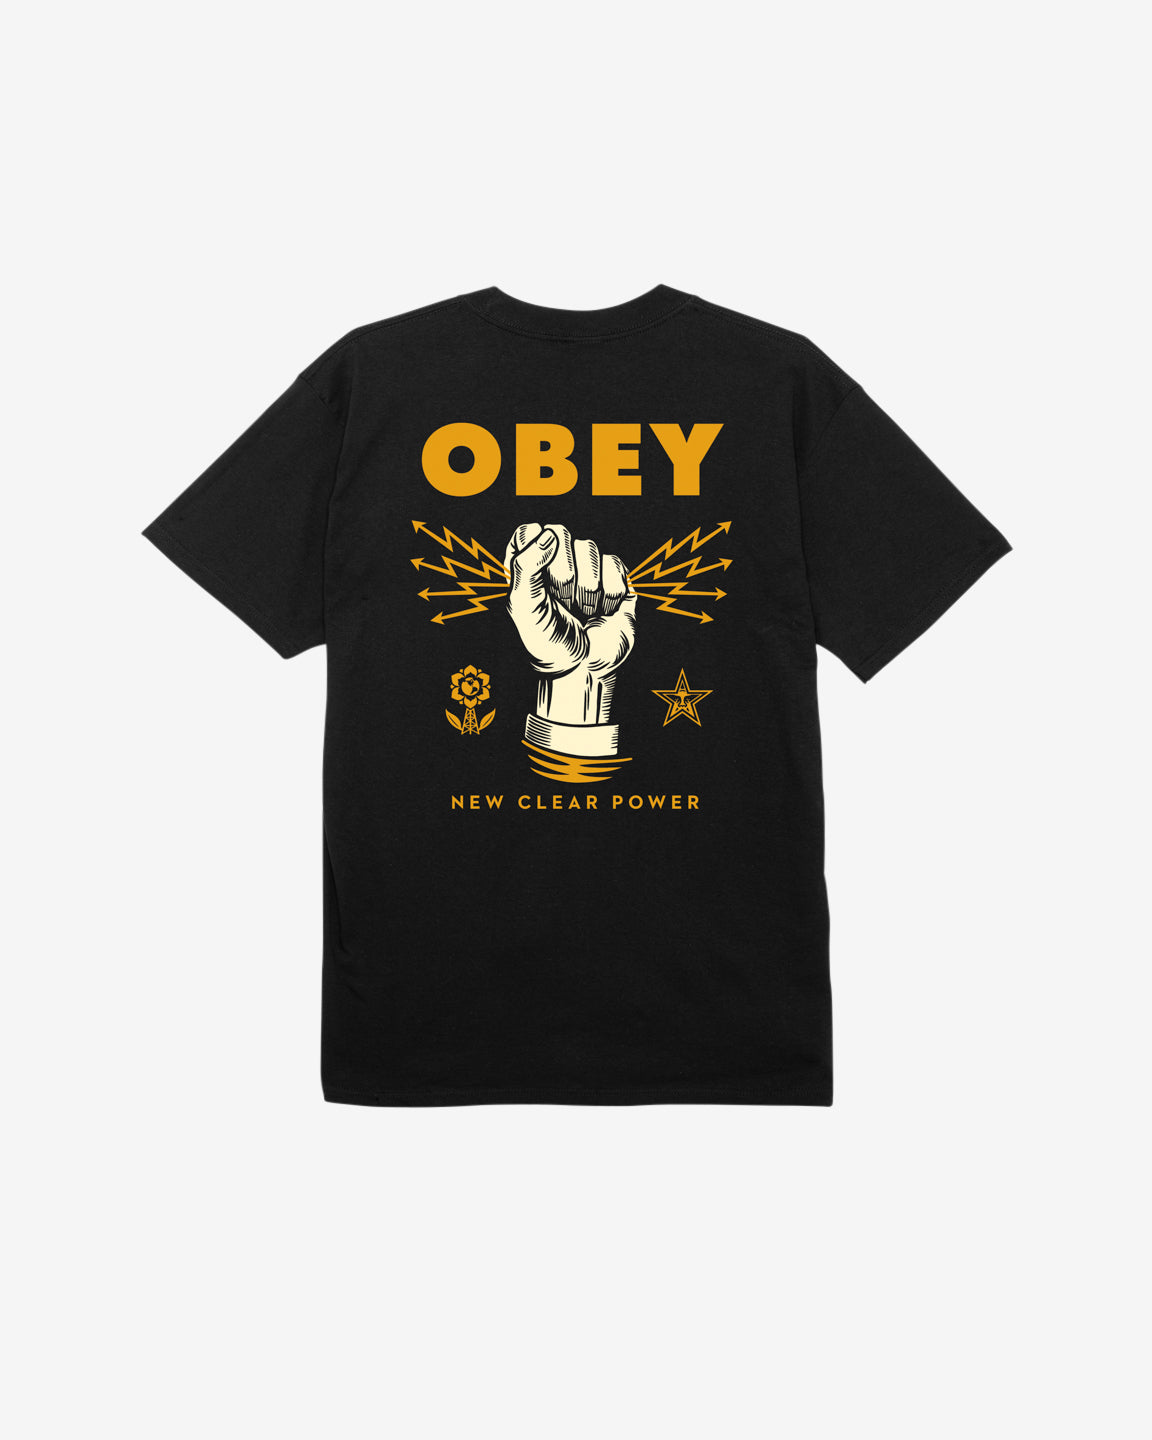 OBEY NEW CLEAR POWER TEE